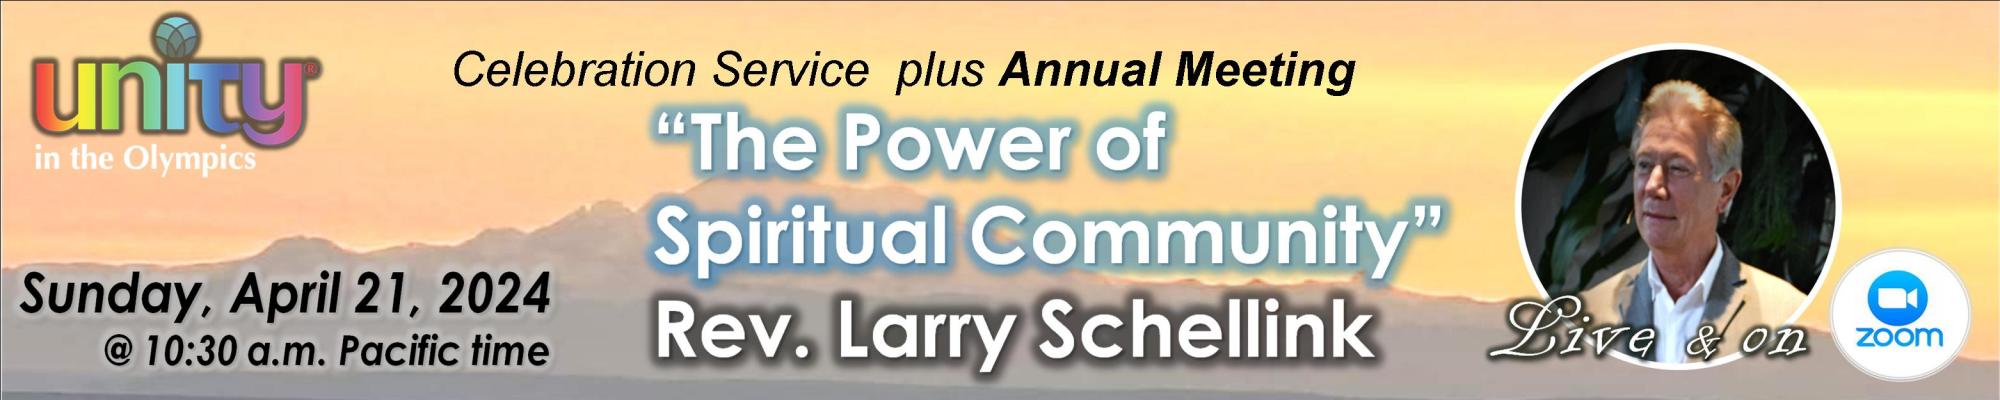 The Power of Spiritual Community with Rev. Larry Schellink